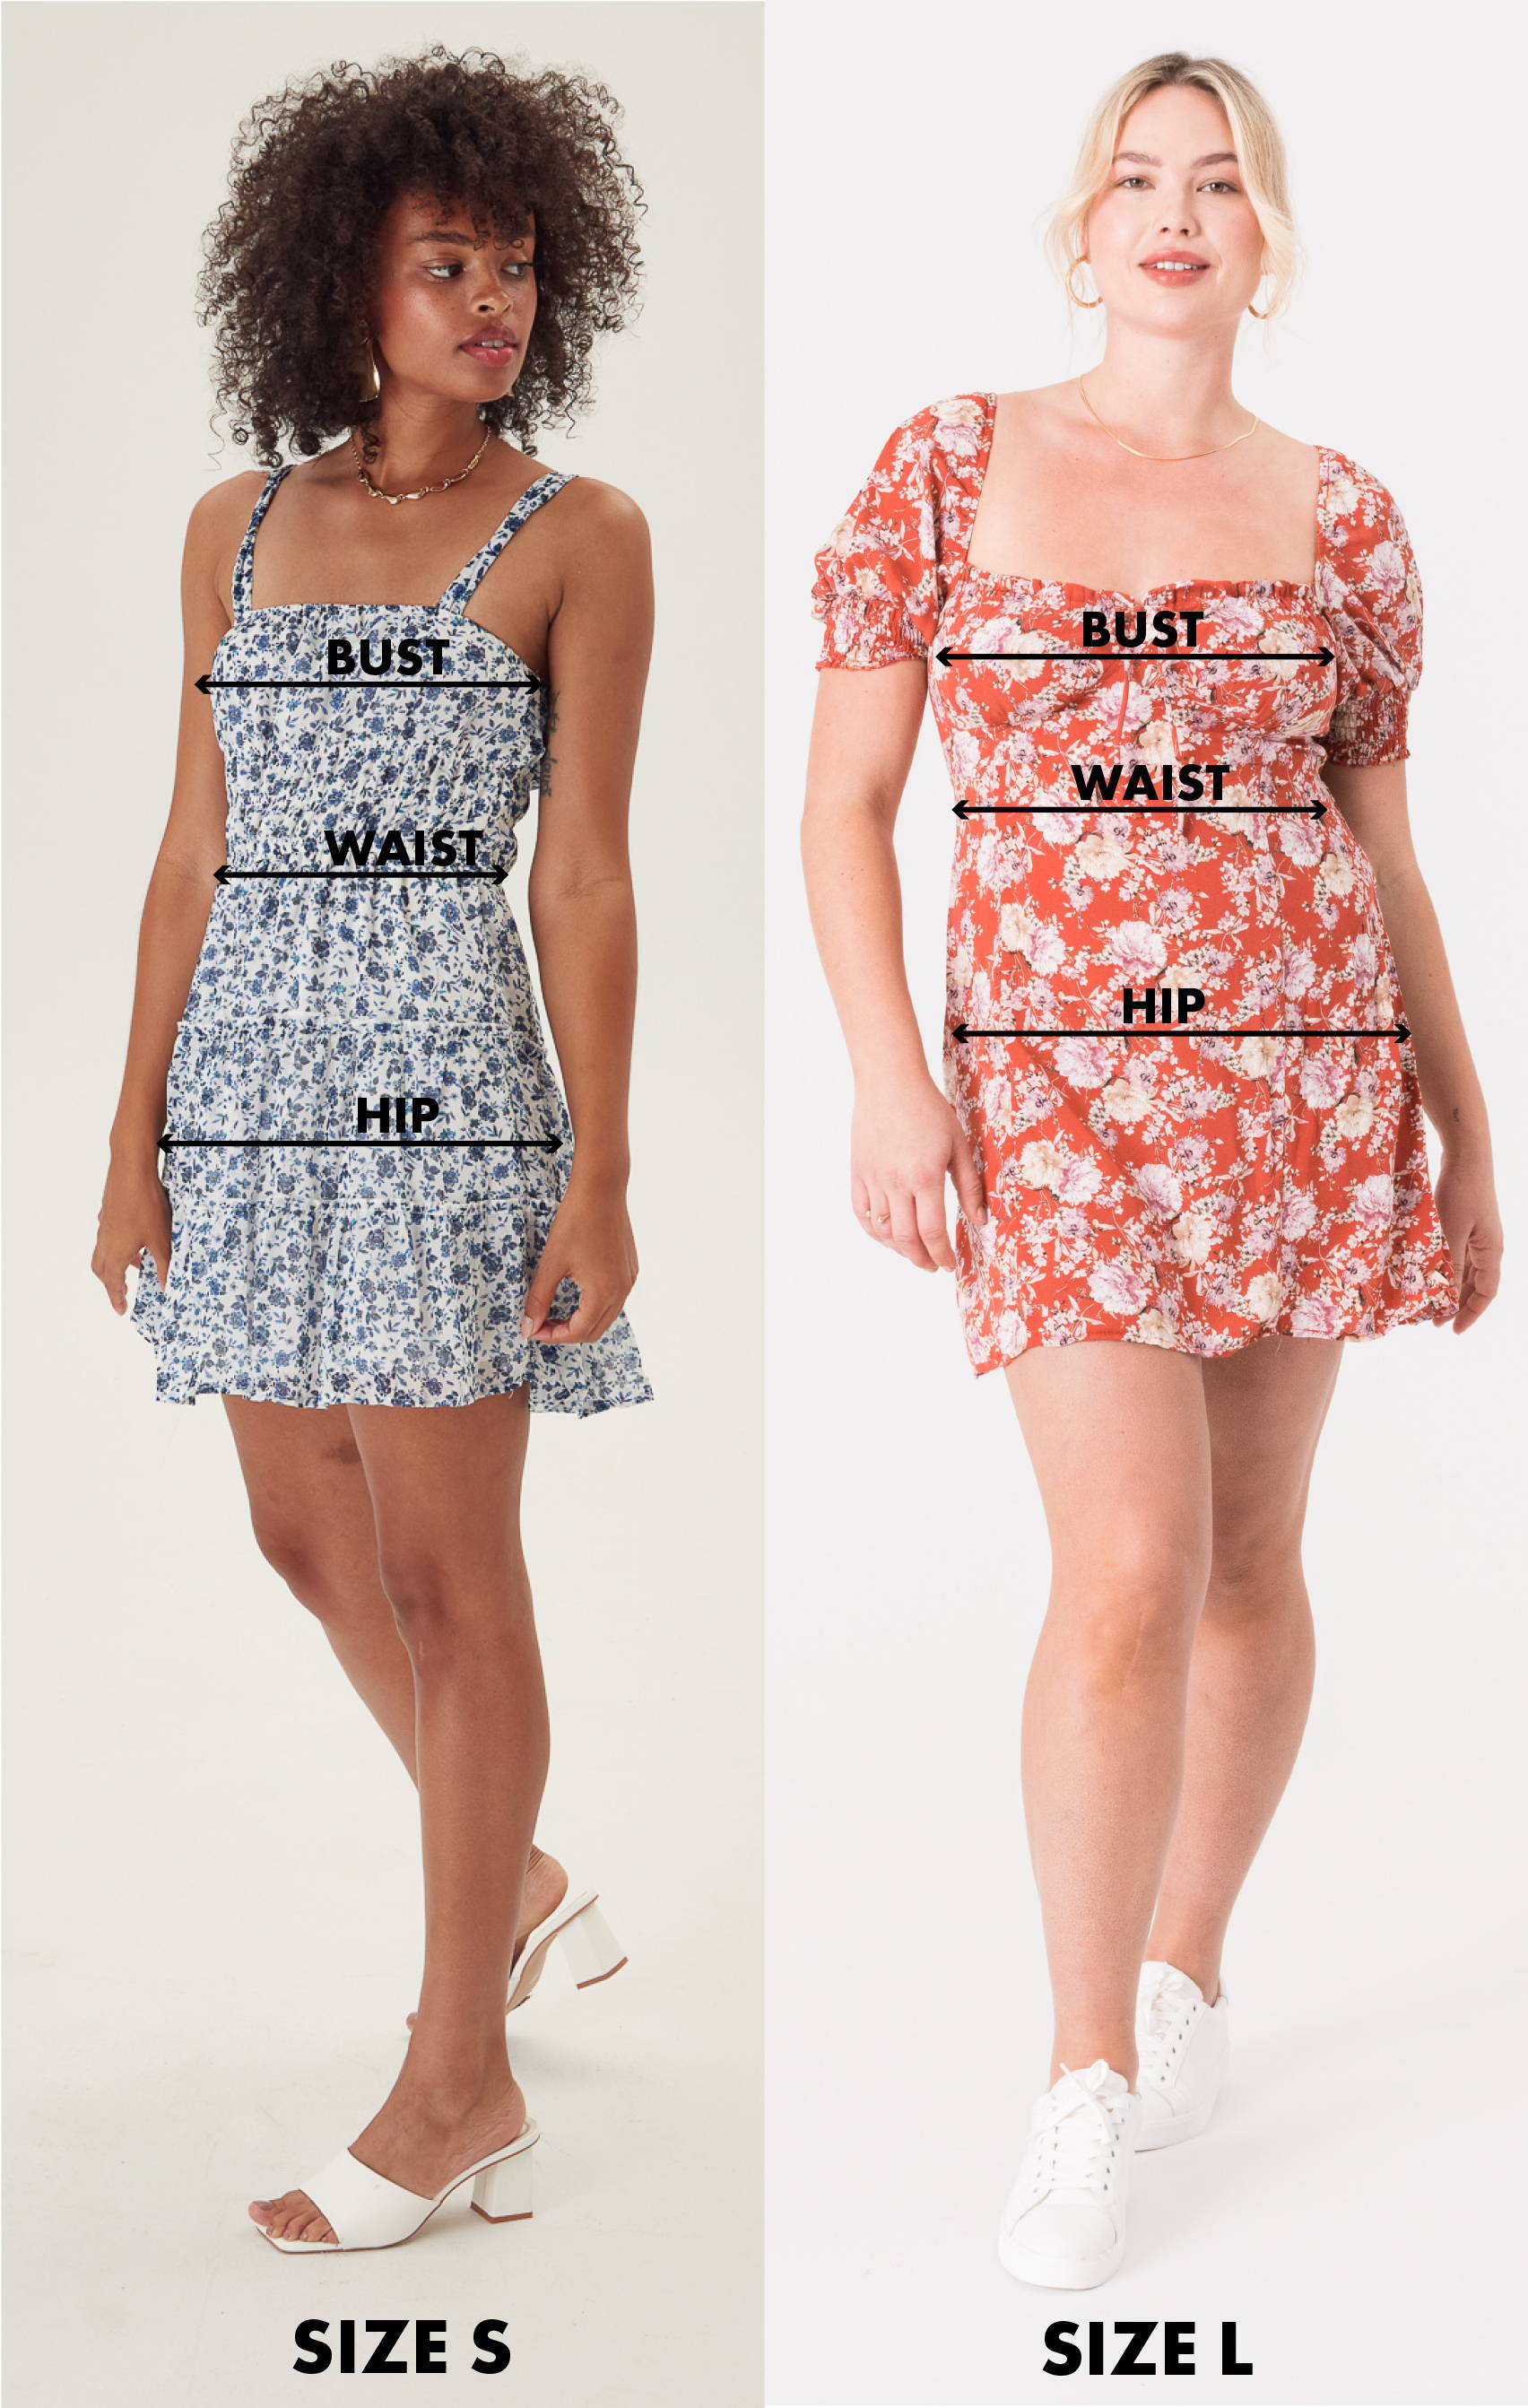 Trixxi size chart comparing a size S and a size L girl with area measurement guides at the bust, waist, and hip.